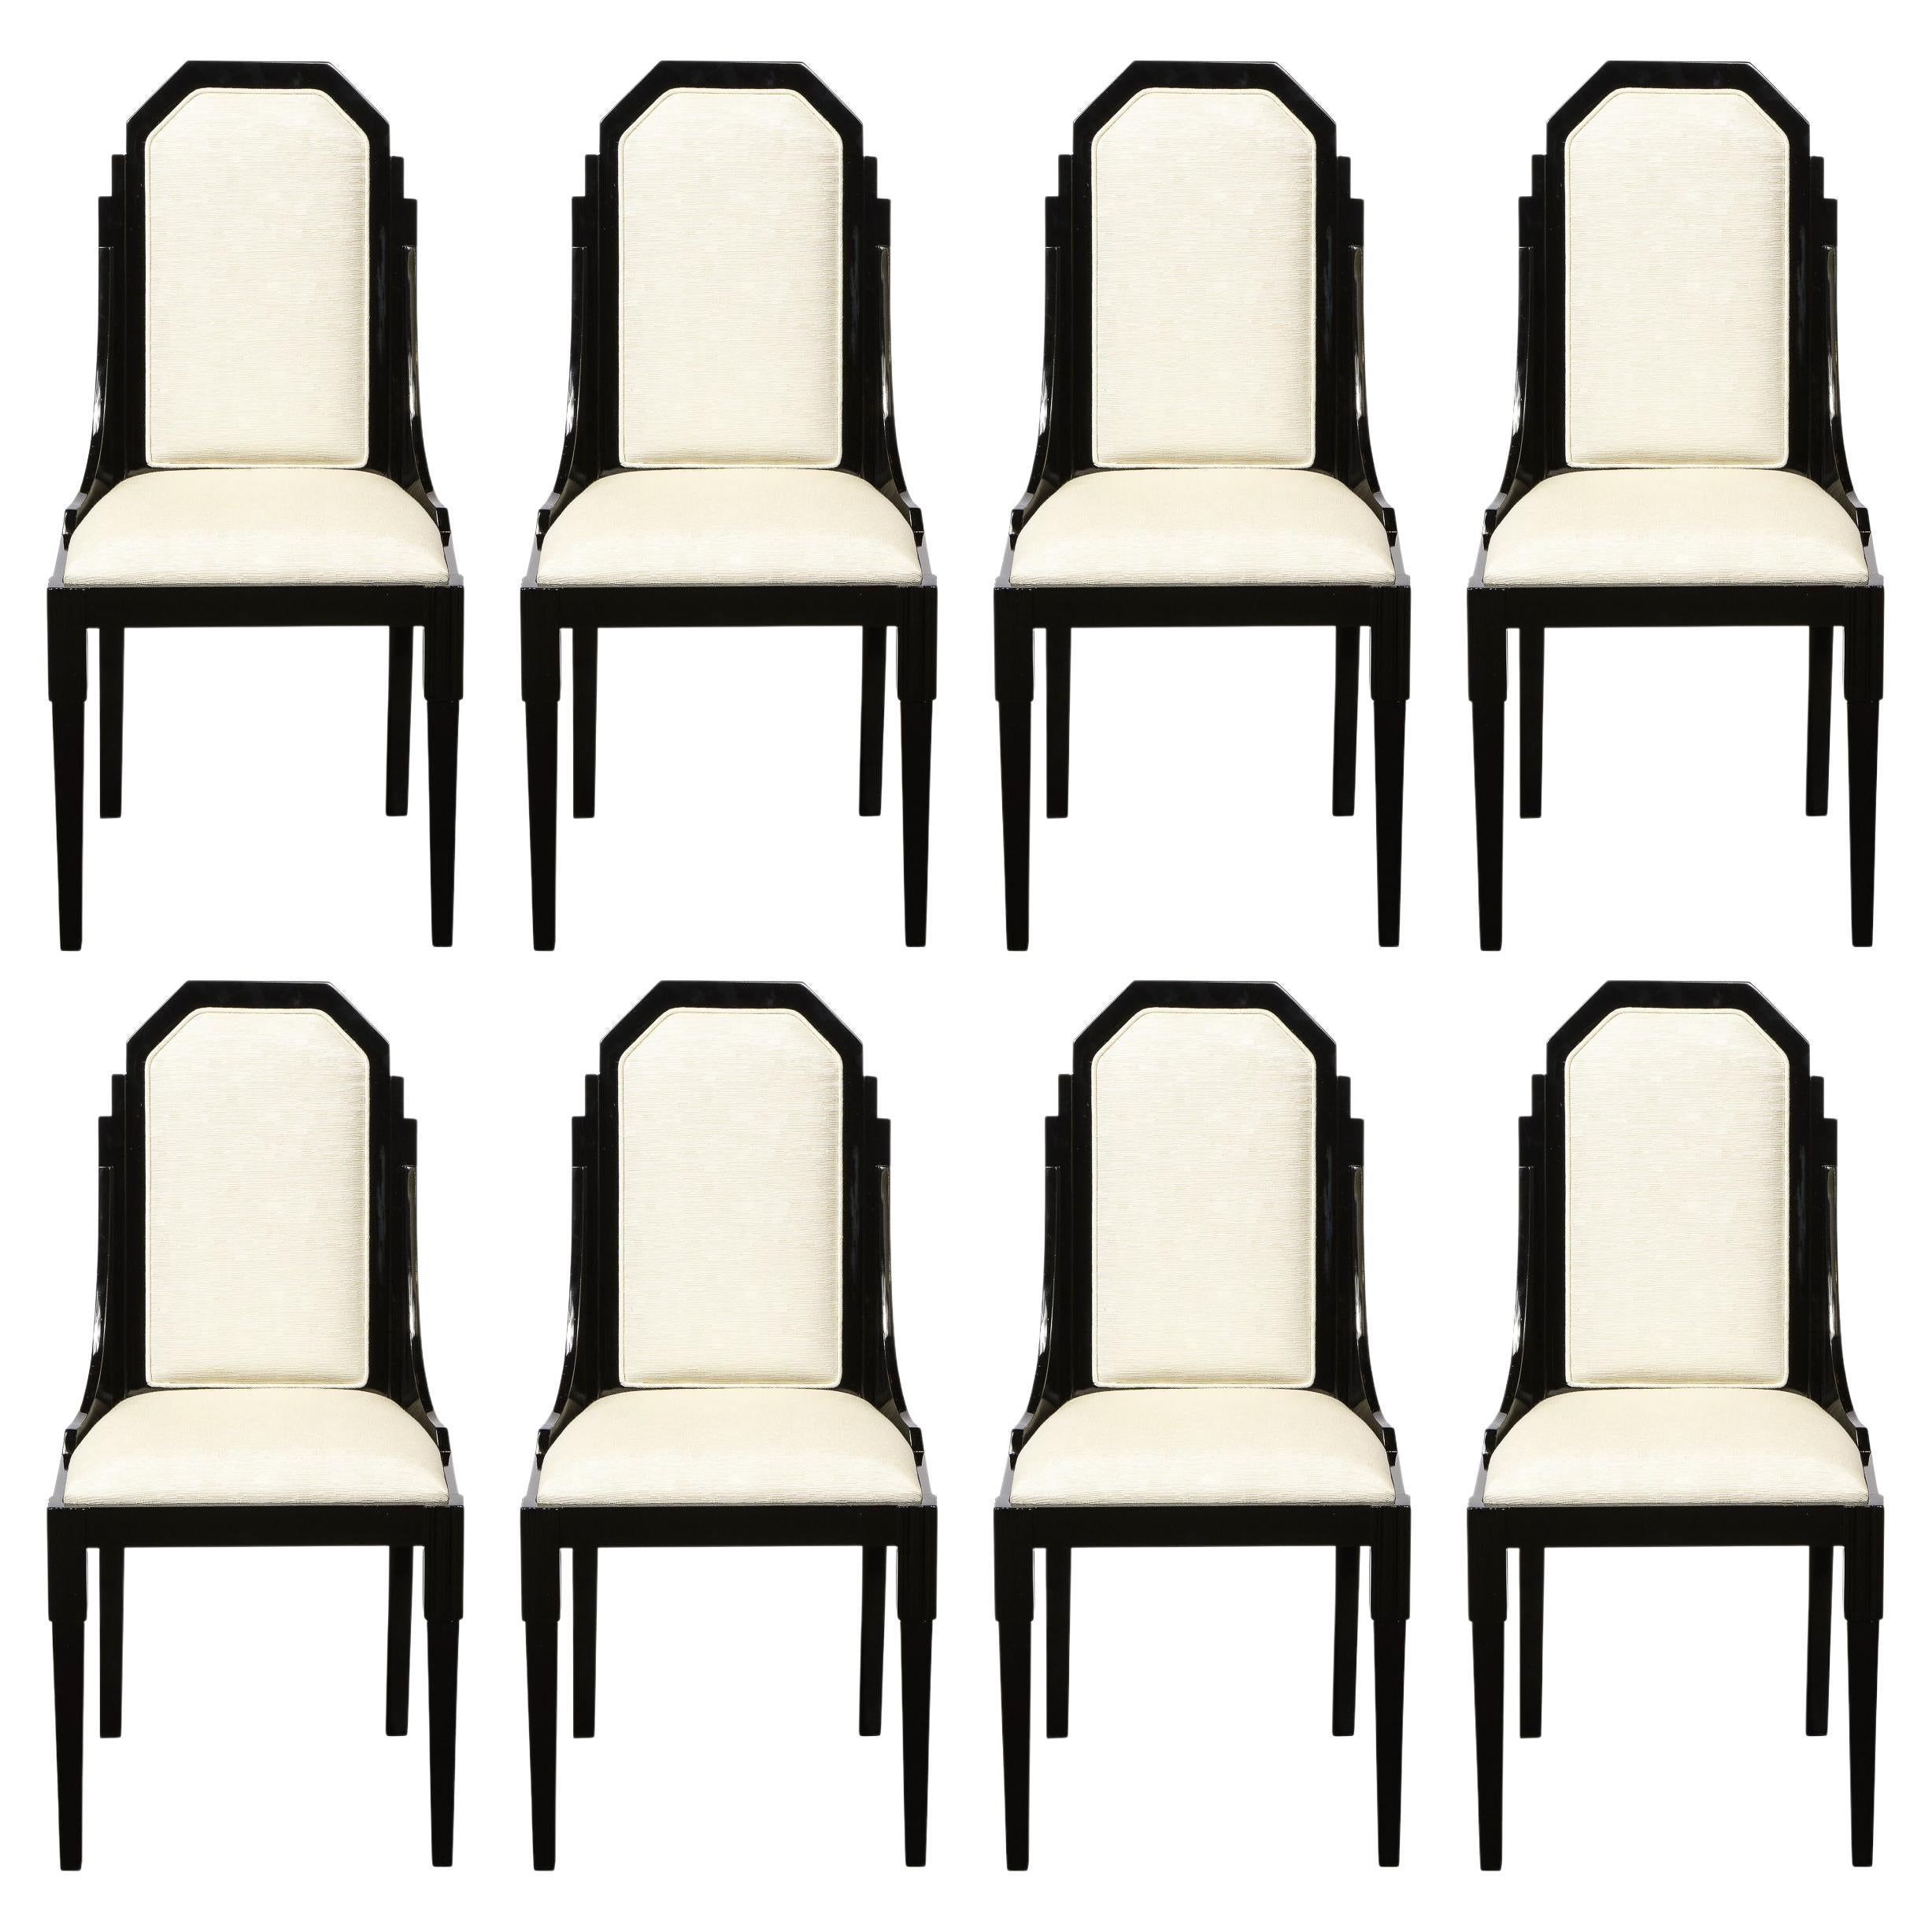 Set of 8 Art Deco Skyscraper Style Machine Age Black Lacquer Dining Chairs